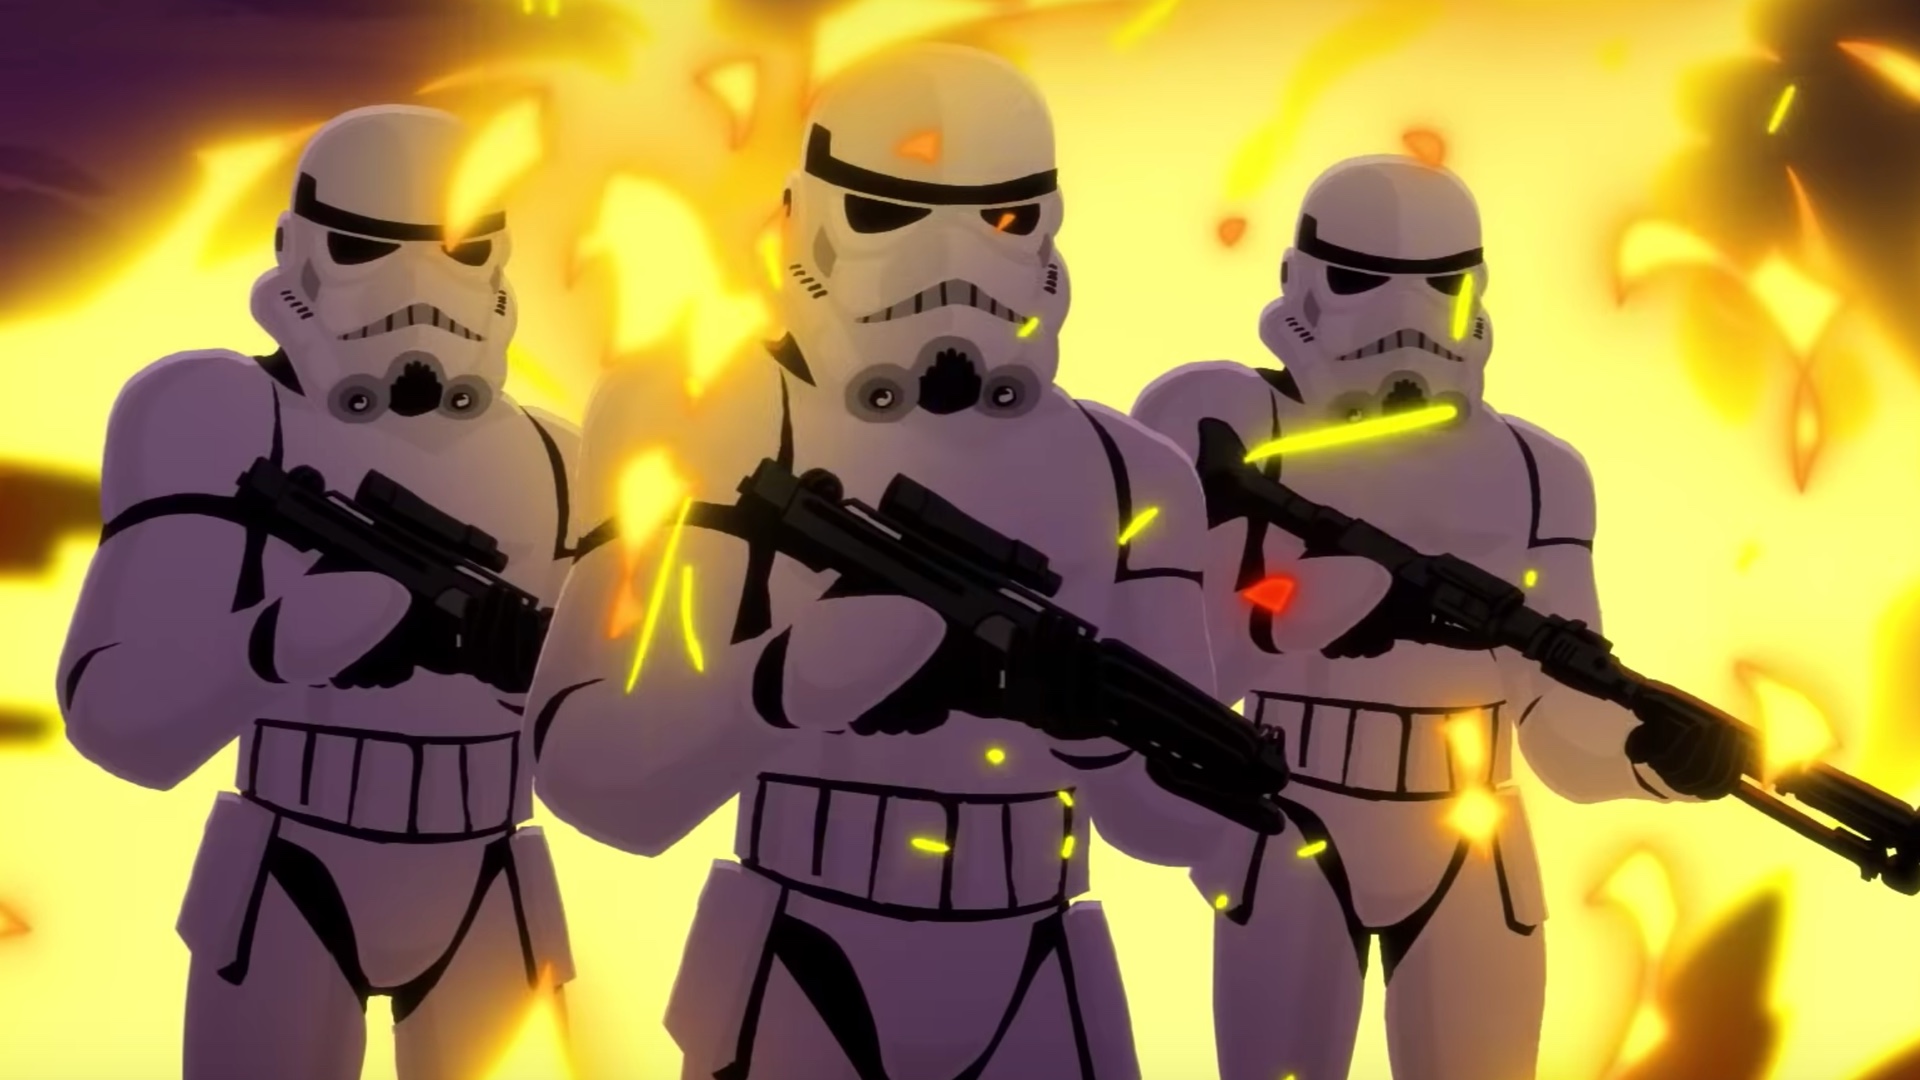 Cool Animated Star Wars Stormtrooper Propaganda Video Soldiers